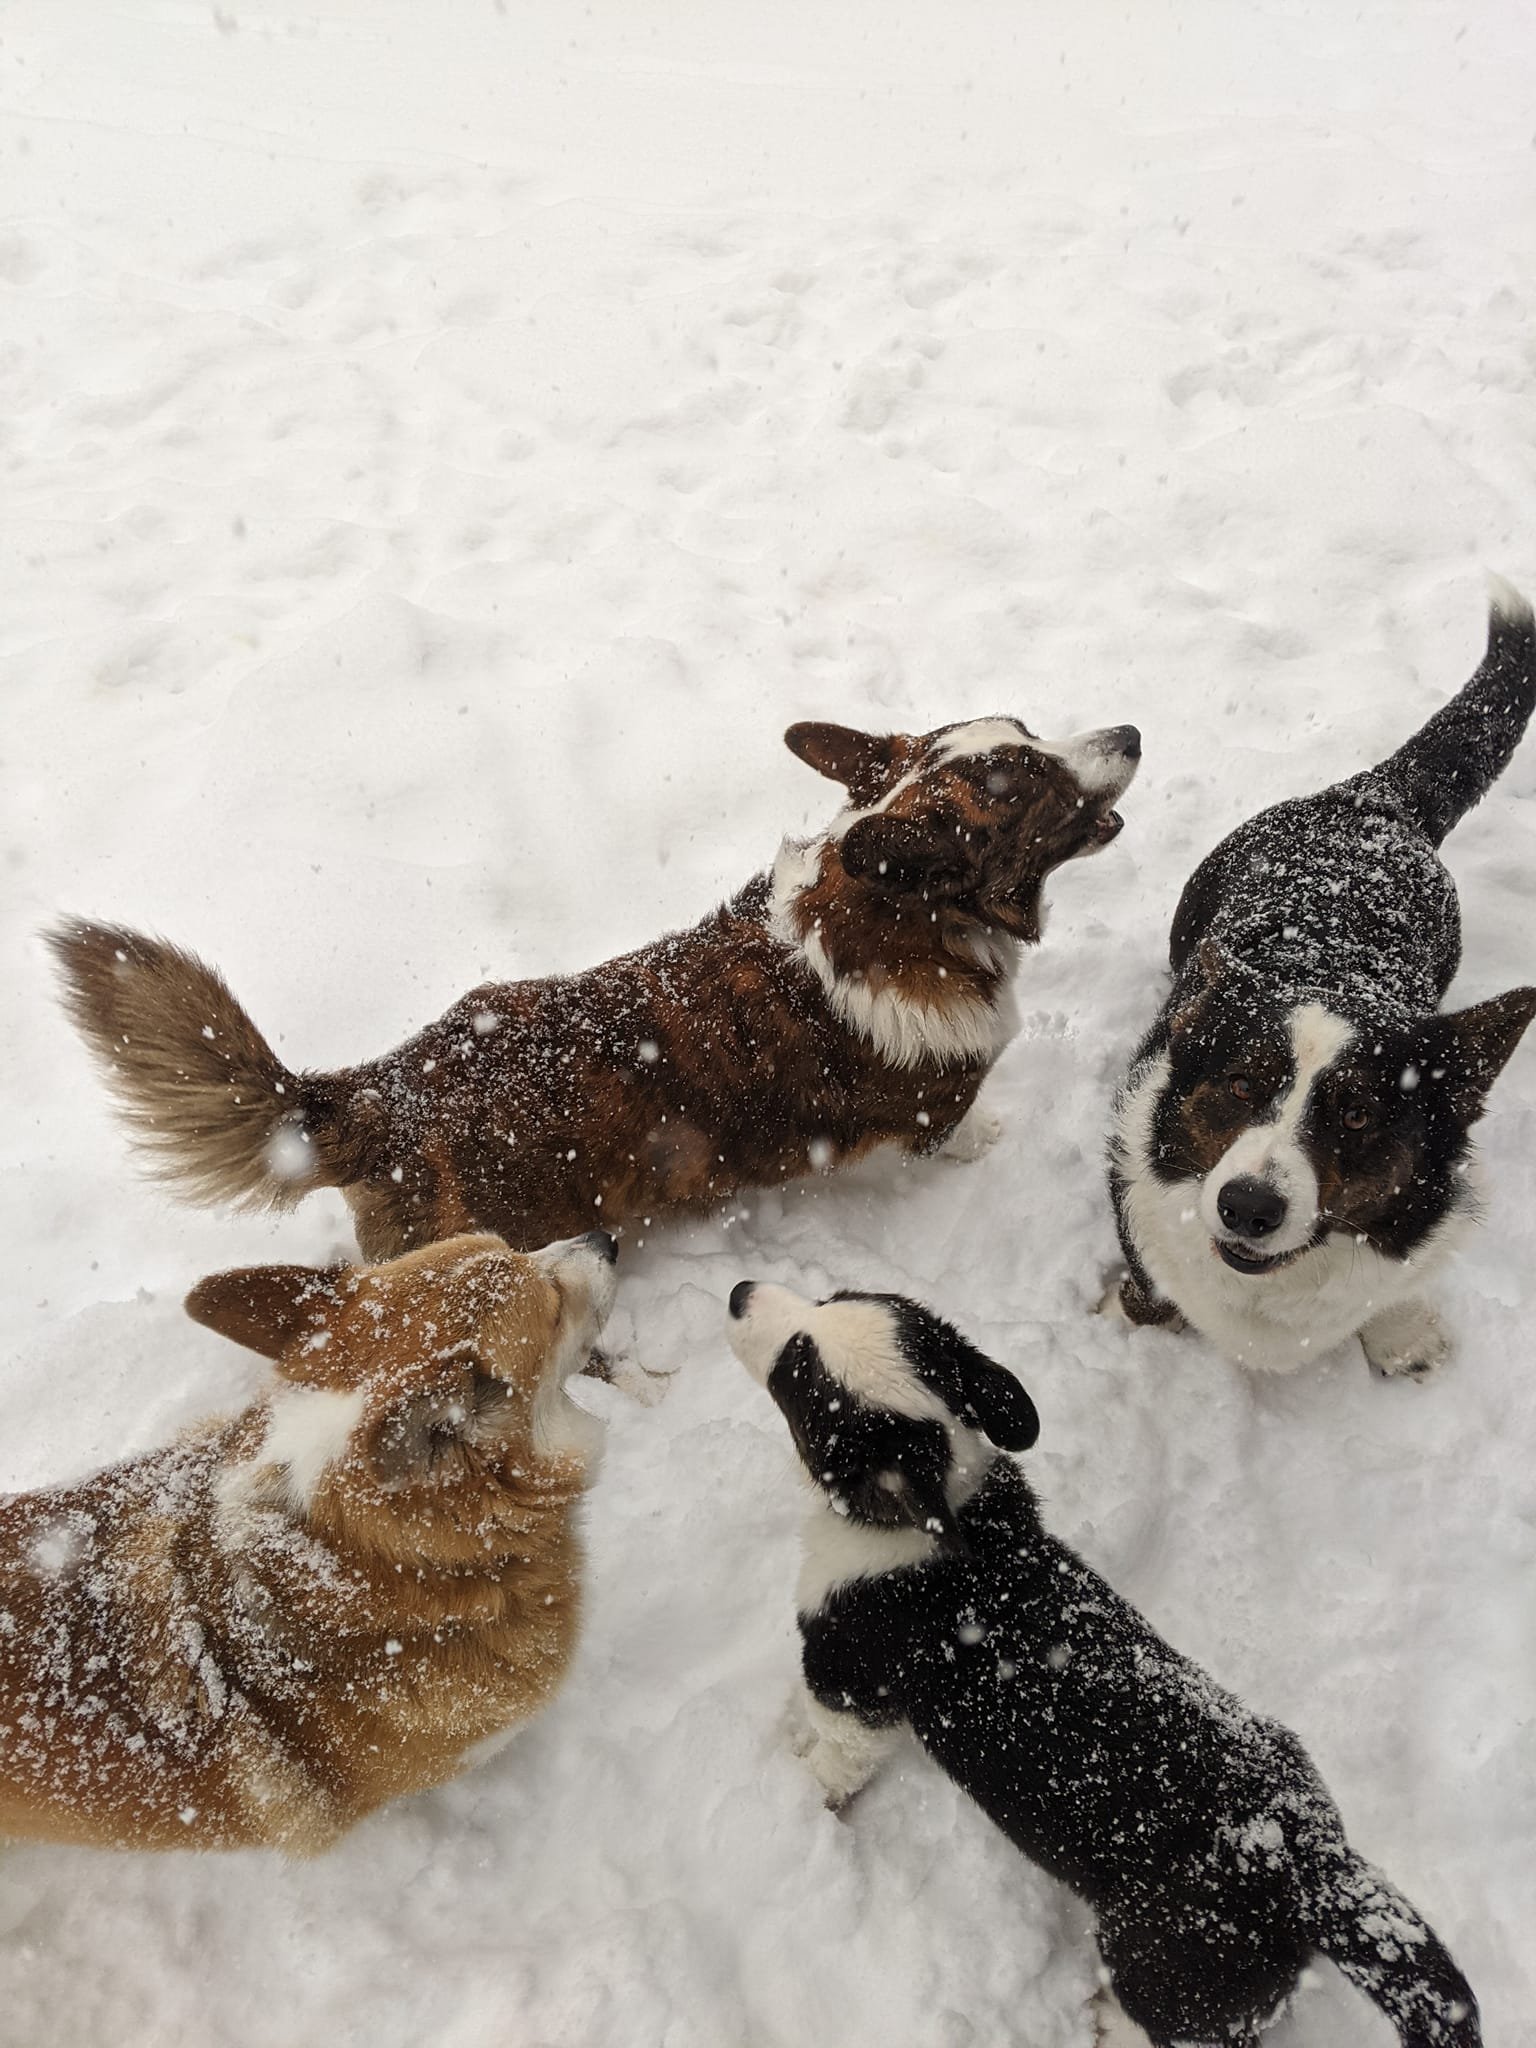   Everyday is a Corgi party at Ripanco Kennels in Duxbury. Enjoying the snow are - from lower left: Phinn, a red Pembroke Welsh Corgi; Dave, red brindle Cardigan Welsh Corgi; Cian, a black and white Cardigan Corgi and the newest member of the pack, 3